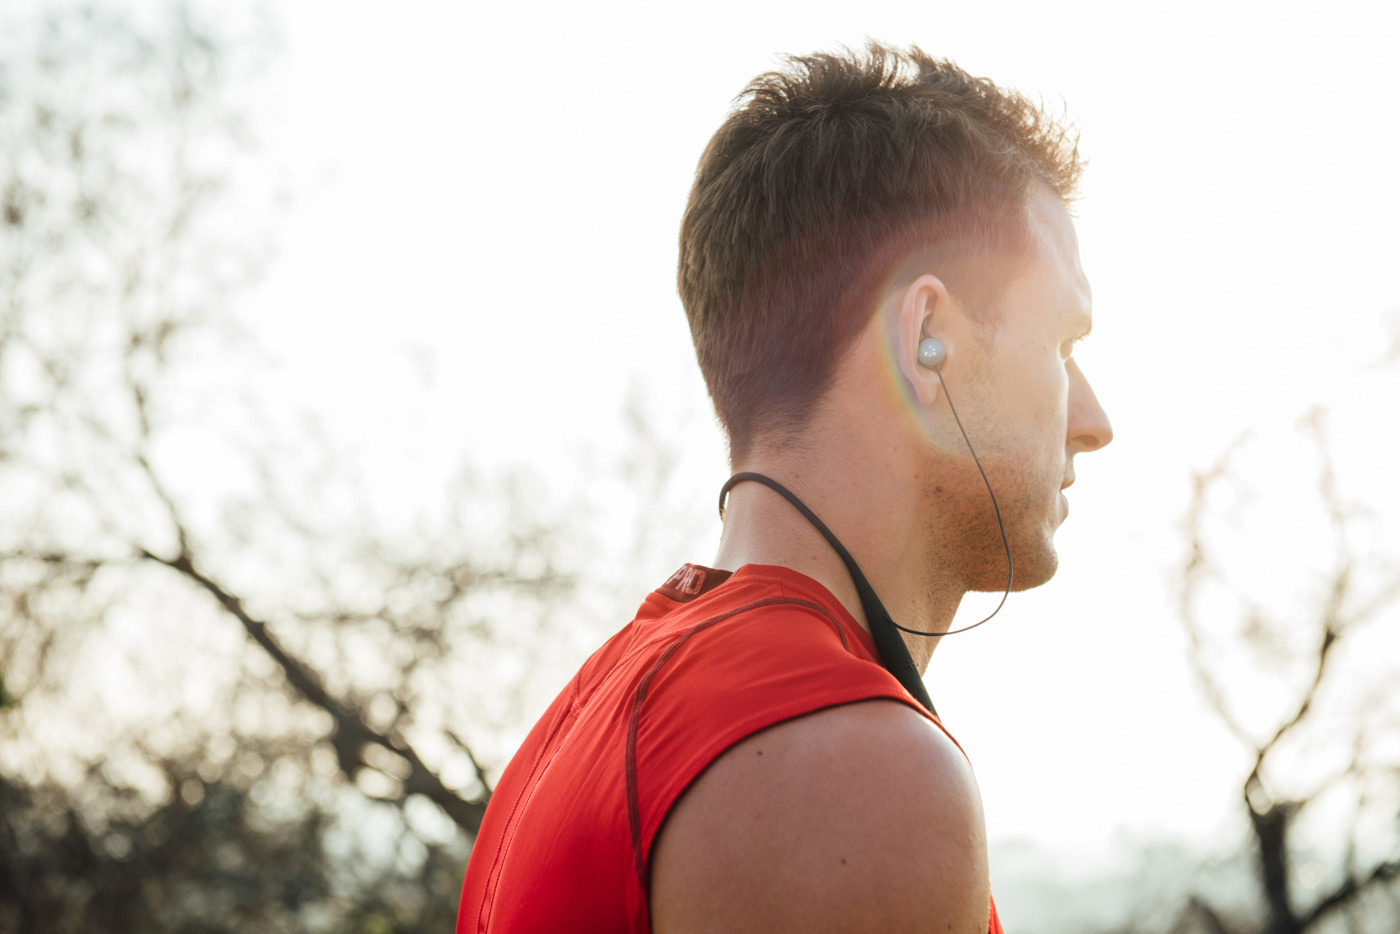 Smart headphones put an AI fitness coach in your ear